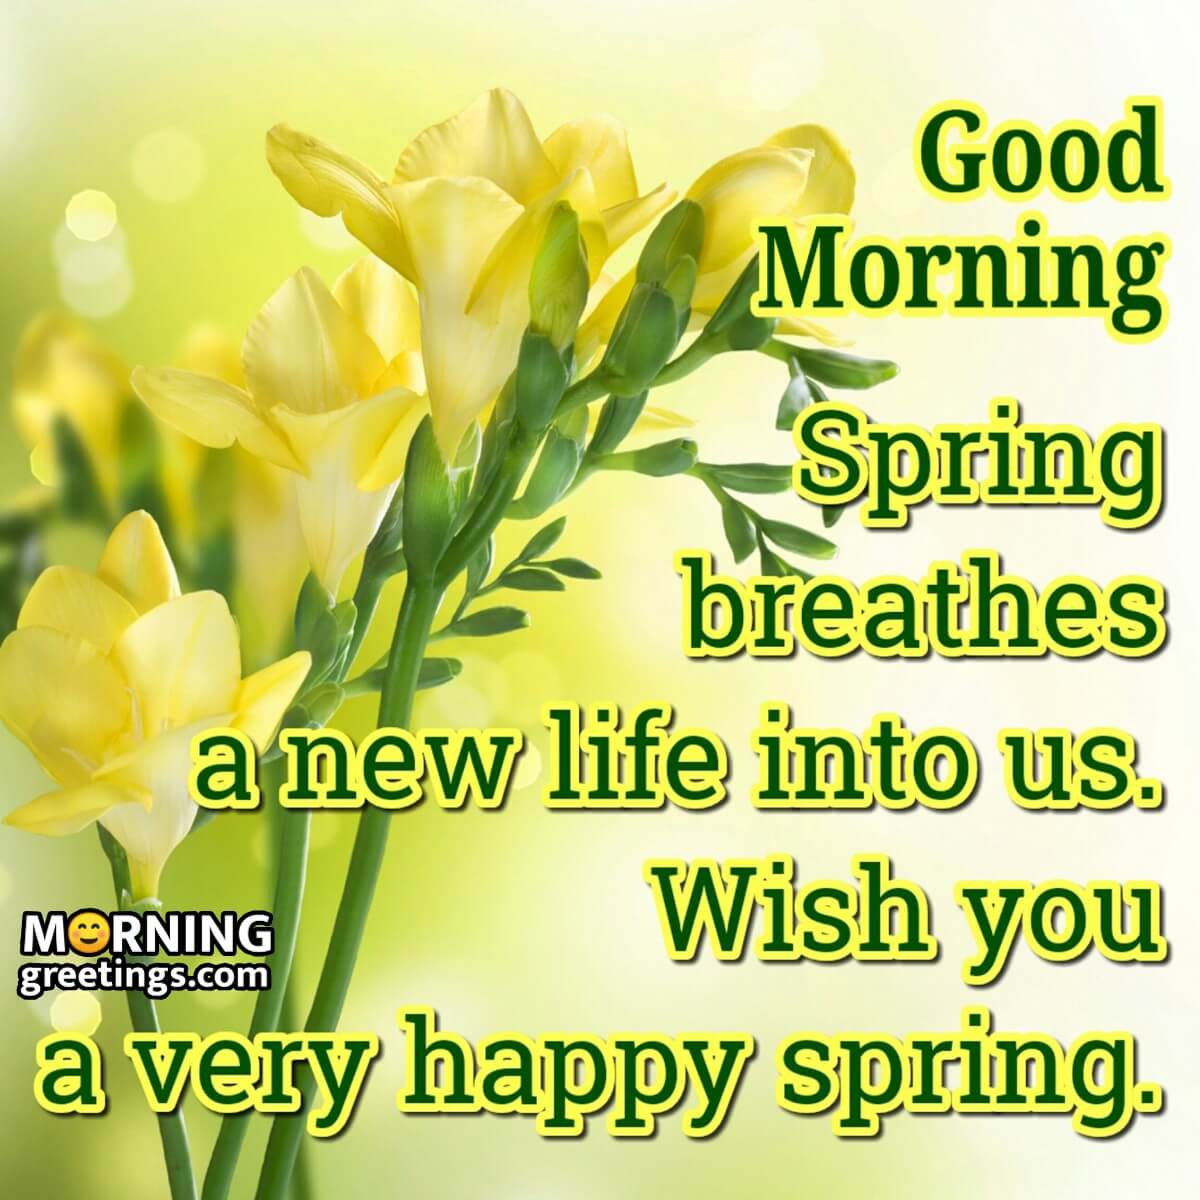 Good Morning Wish You A Very Happy Spring